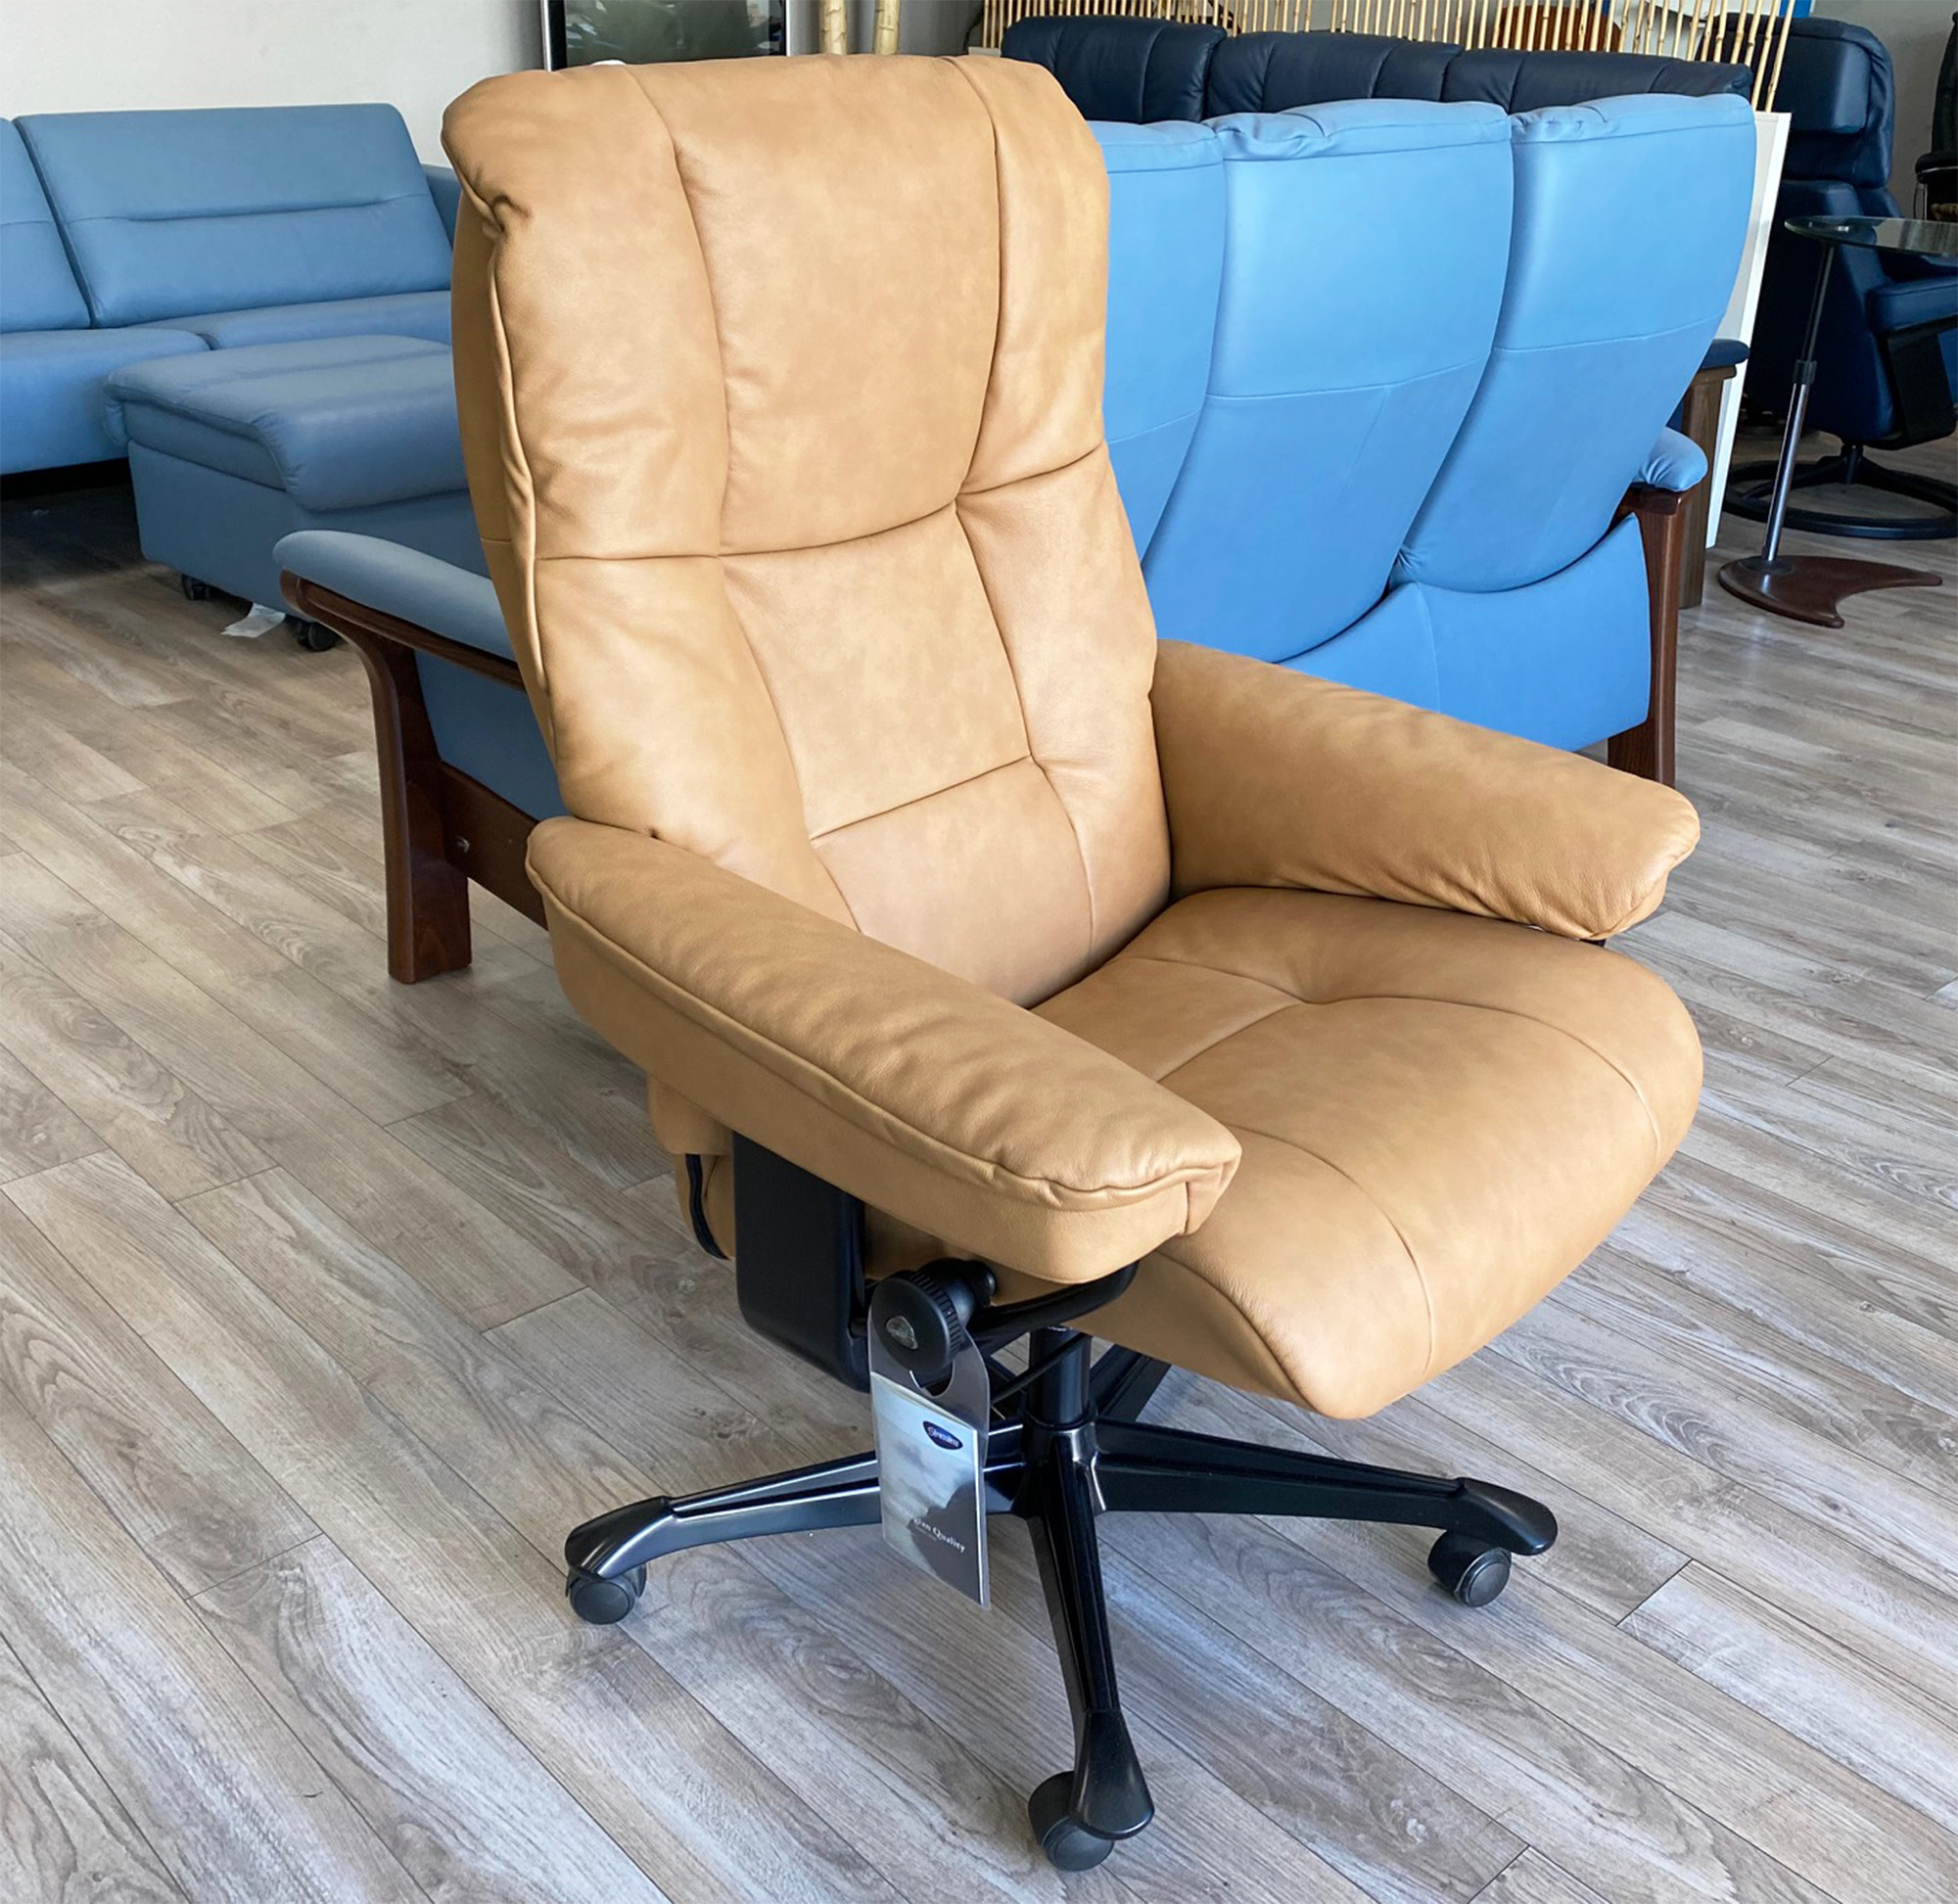 Stressless Mayfair Executive Office Desk Chair in Paloma Taupe Leather by Ekornes